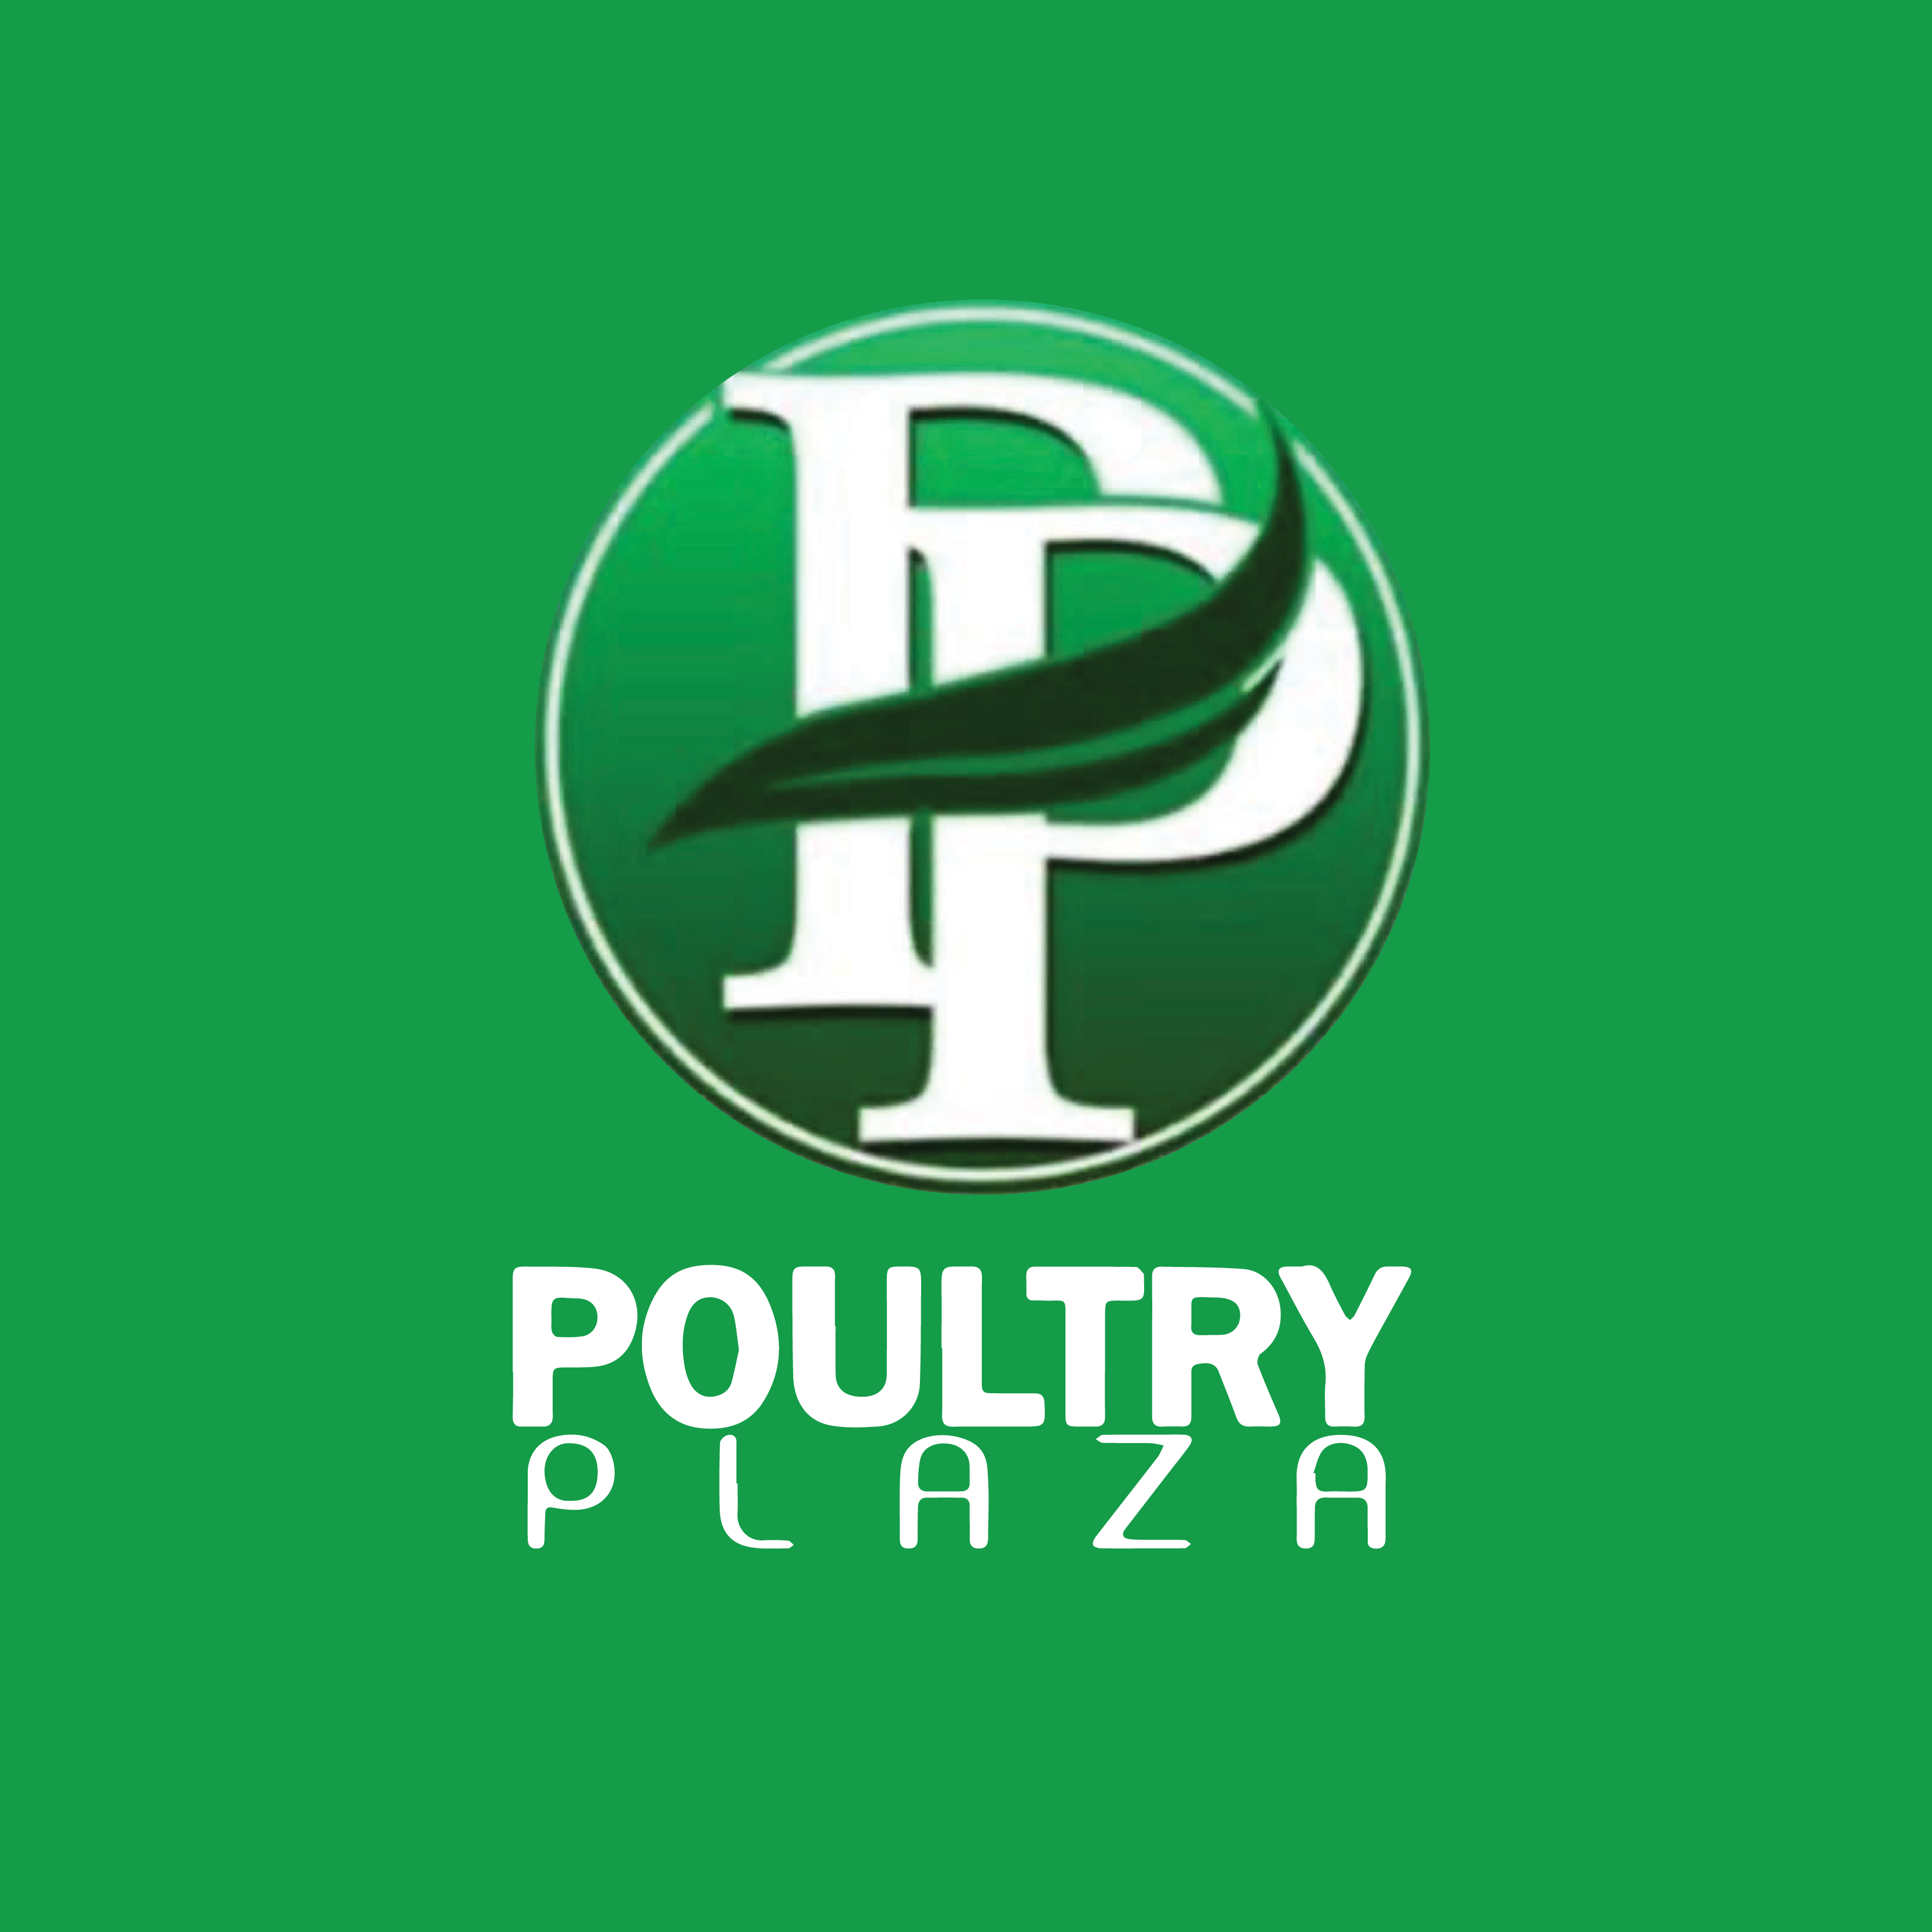 Poultry Plaza Ng